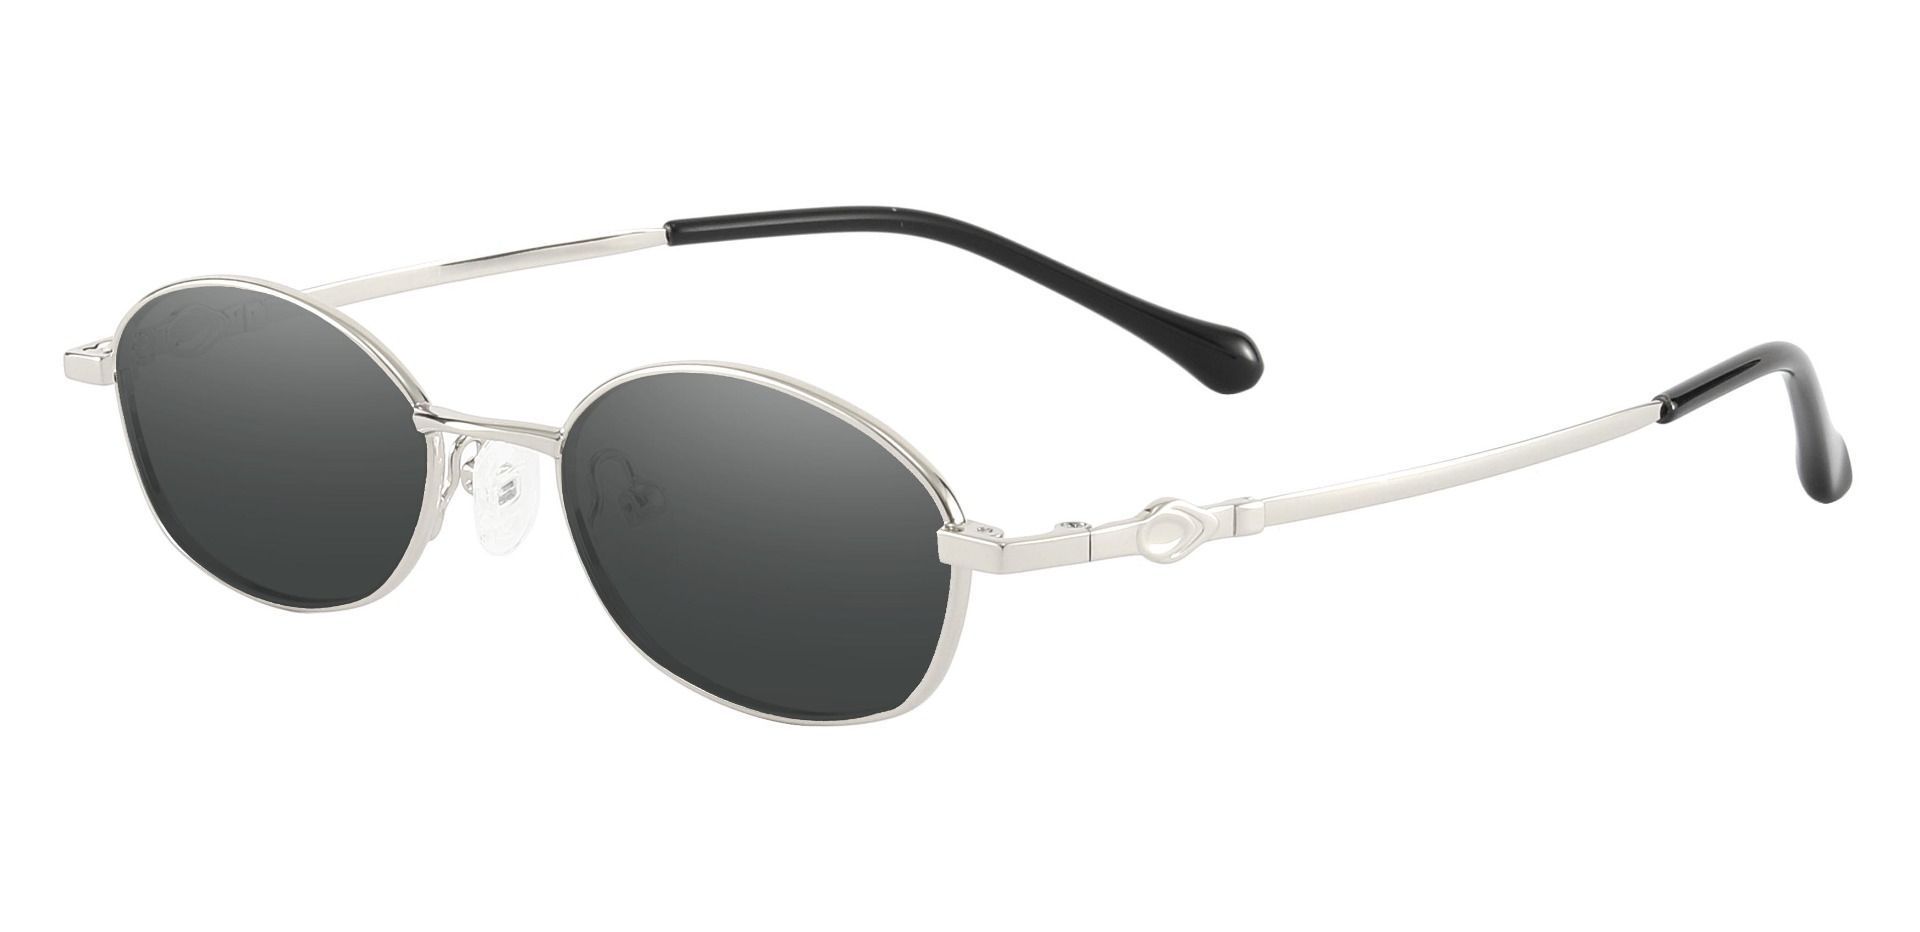 Fletcher Oval Reading Sunglasses - Silver Frame With Gray Lenses